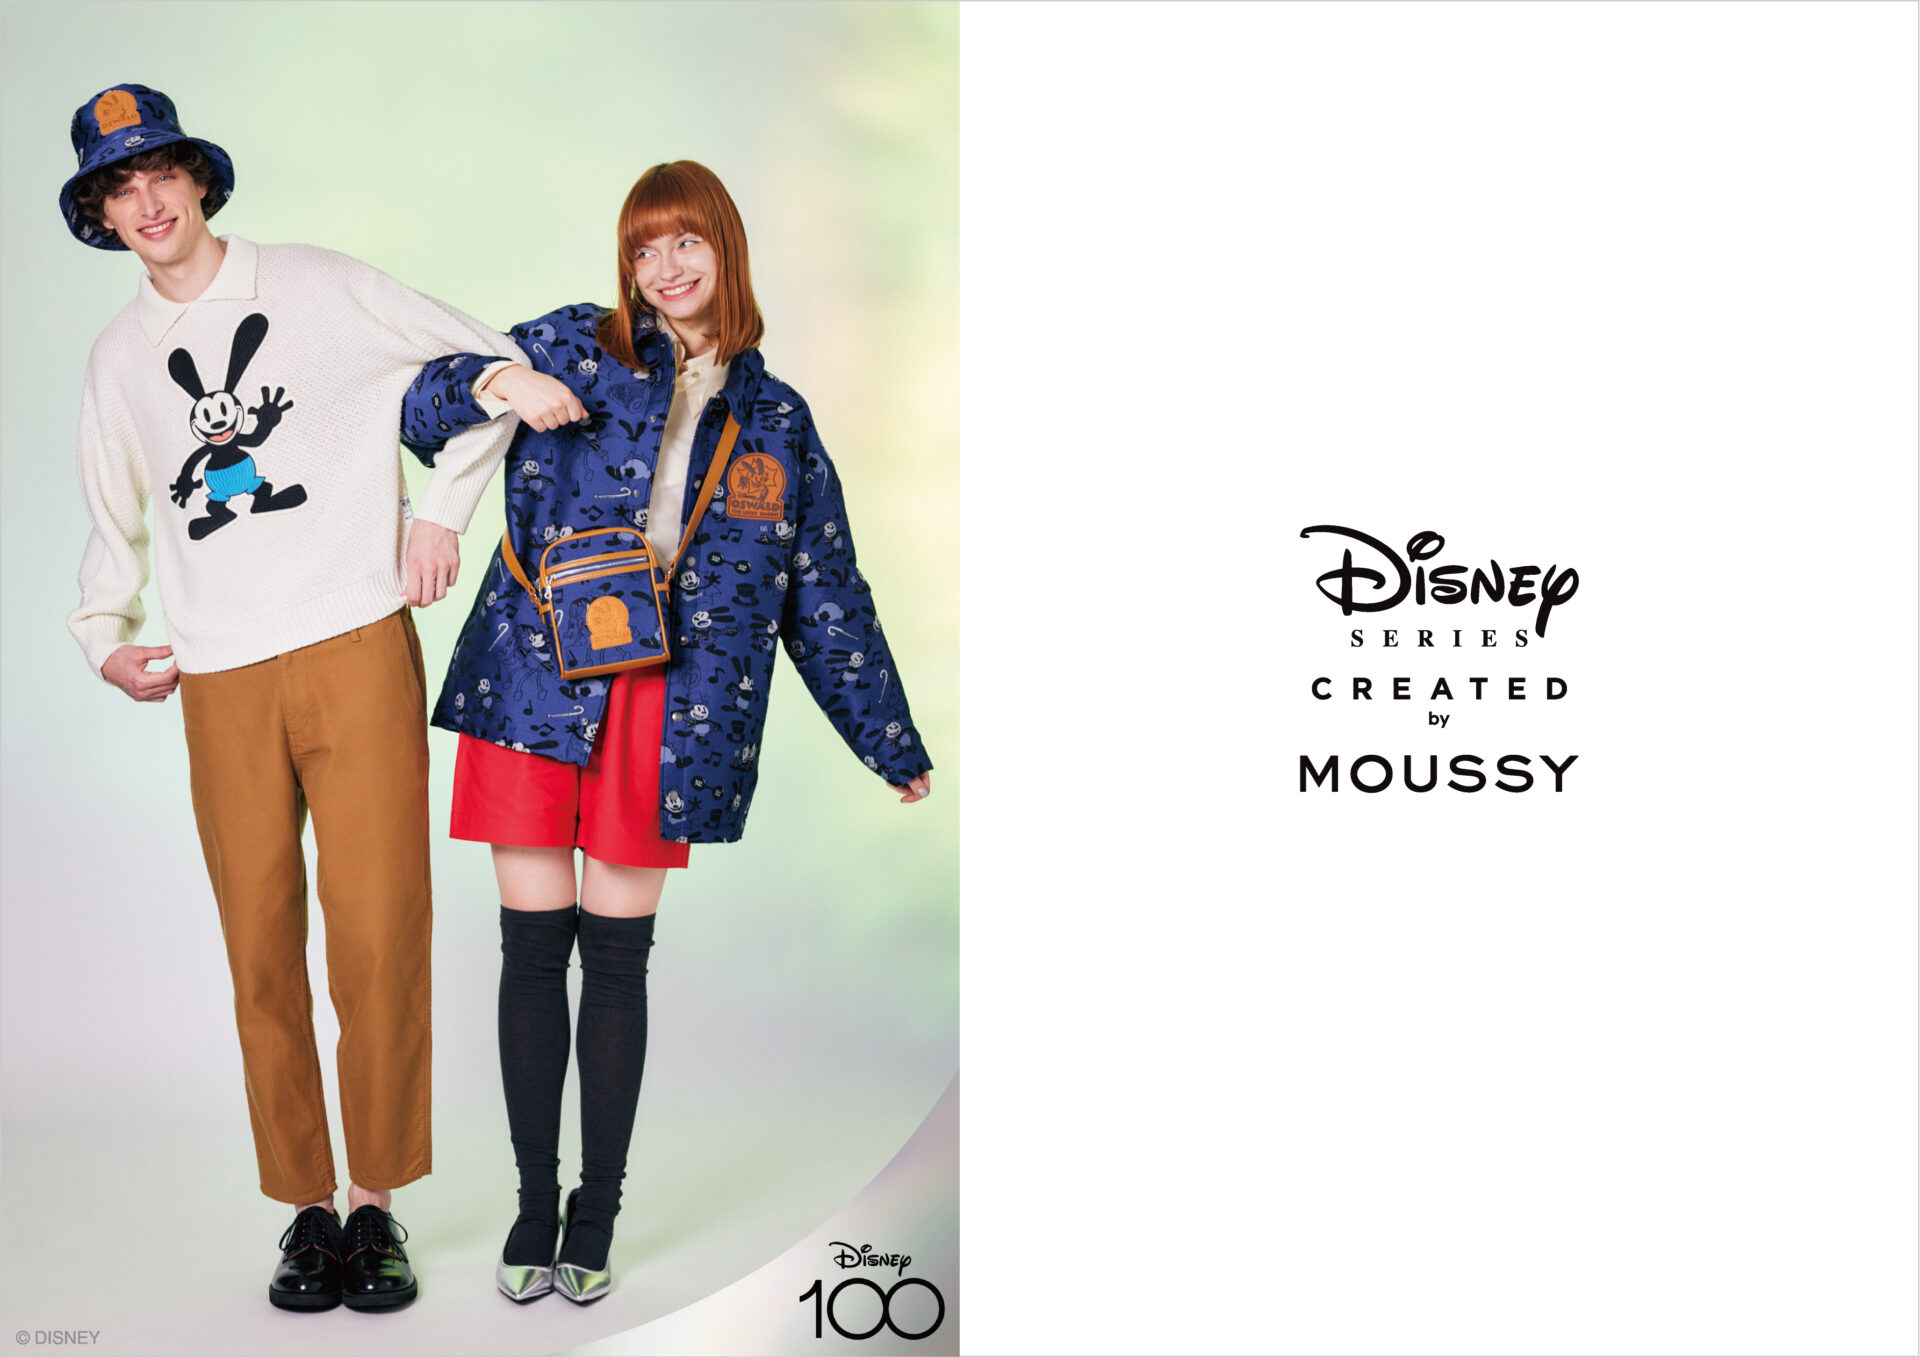 MOUSSY(マウジー)より「Disney SERIES CREATED by MOUSSY」 Disney100 OSWALD SPECIAL COLLECTION が登場!